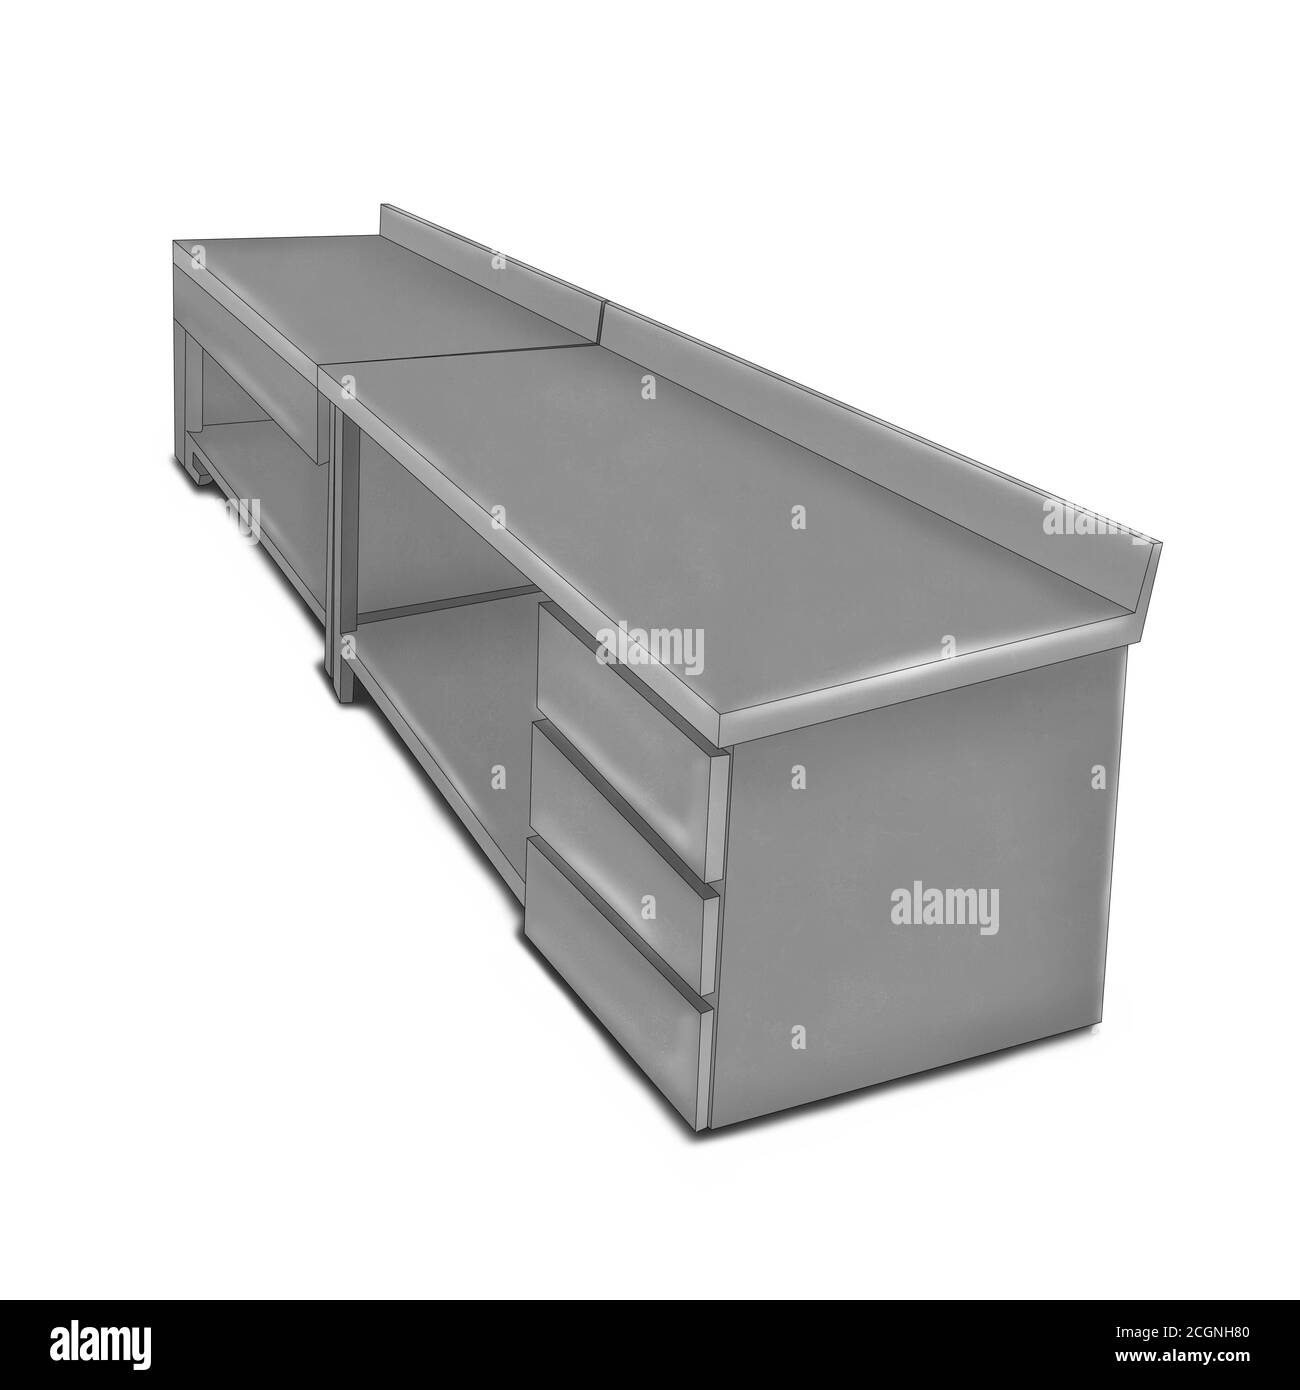 Steel long kitchen table. Illustration on a white background.. Stock Photo